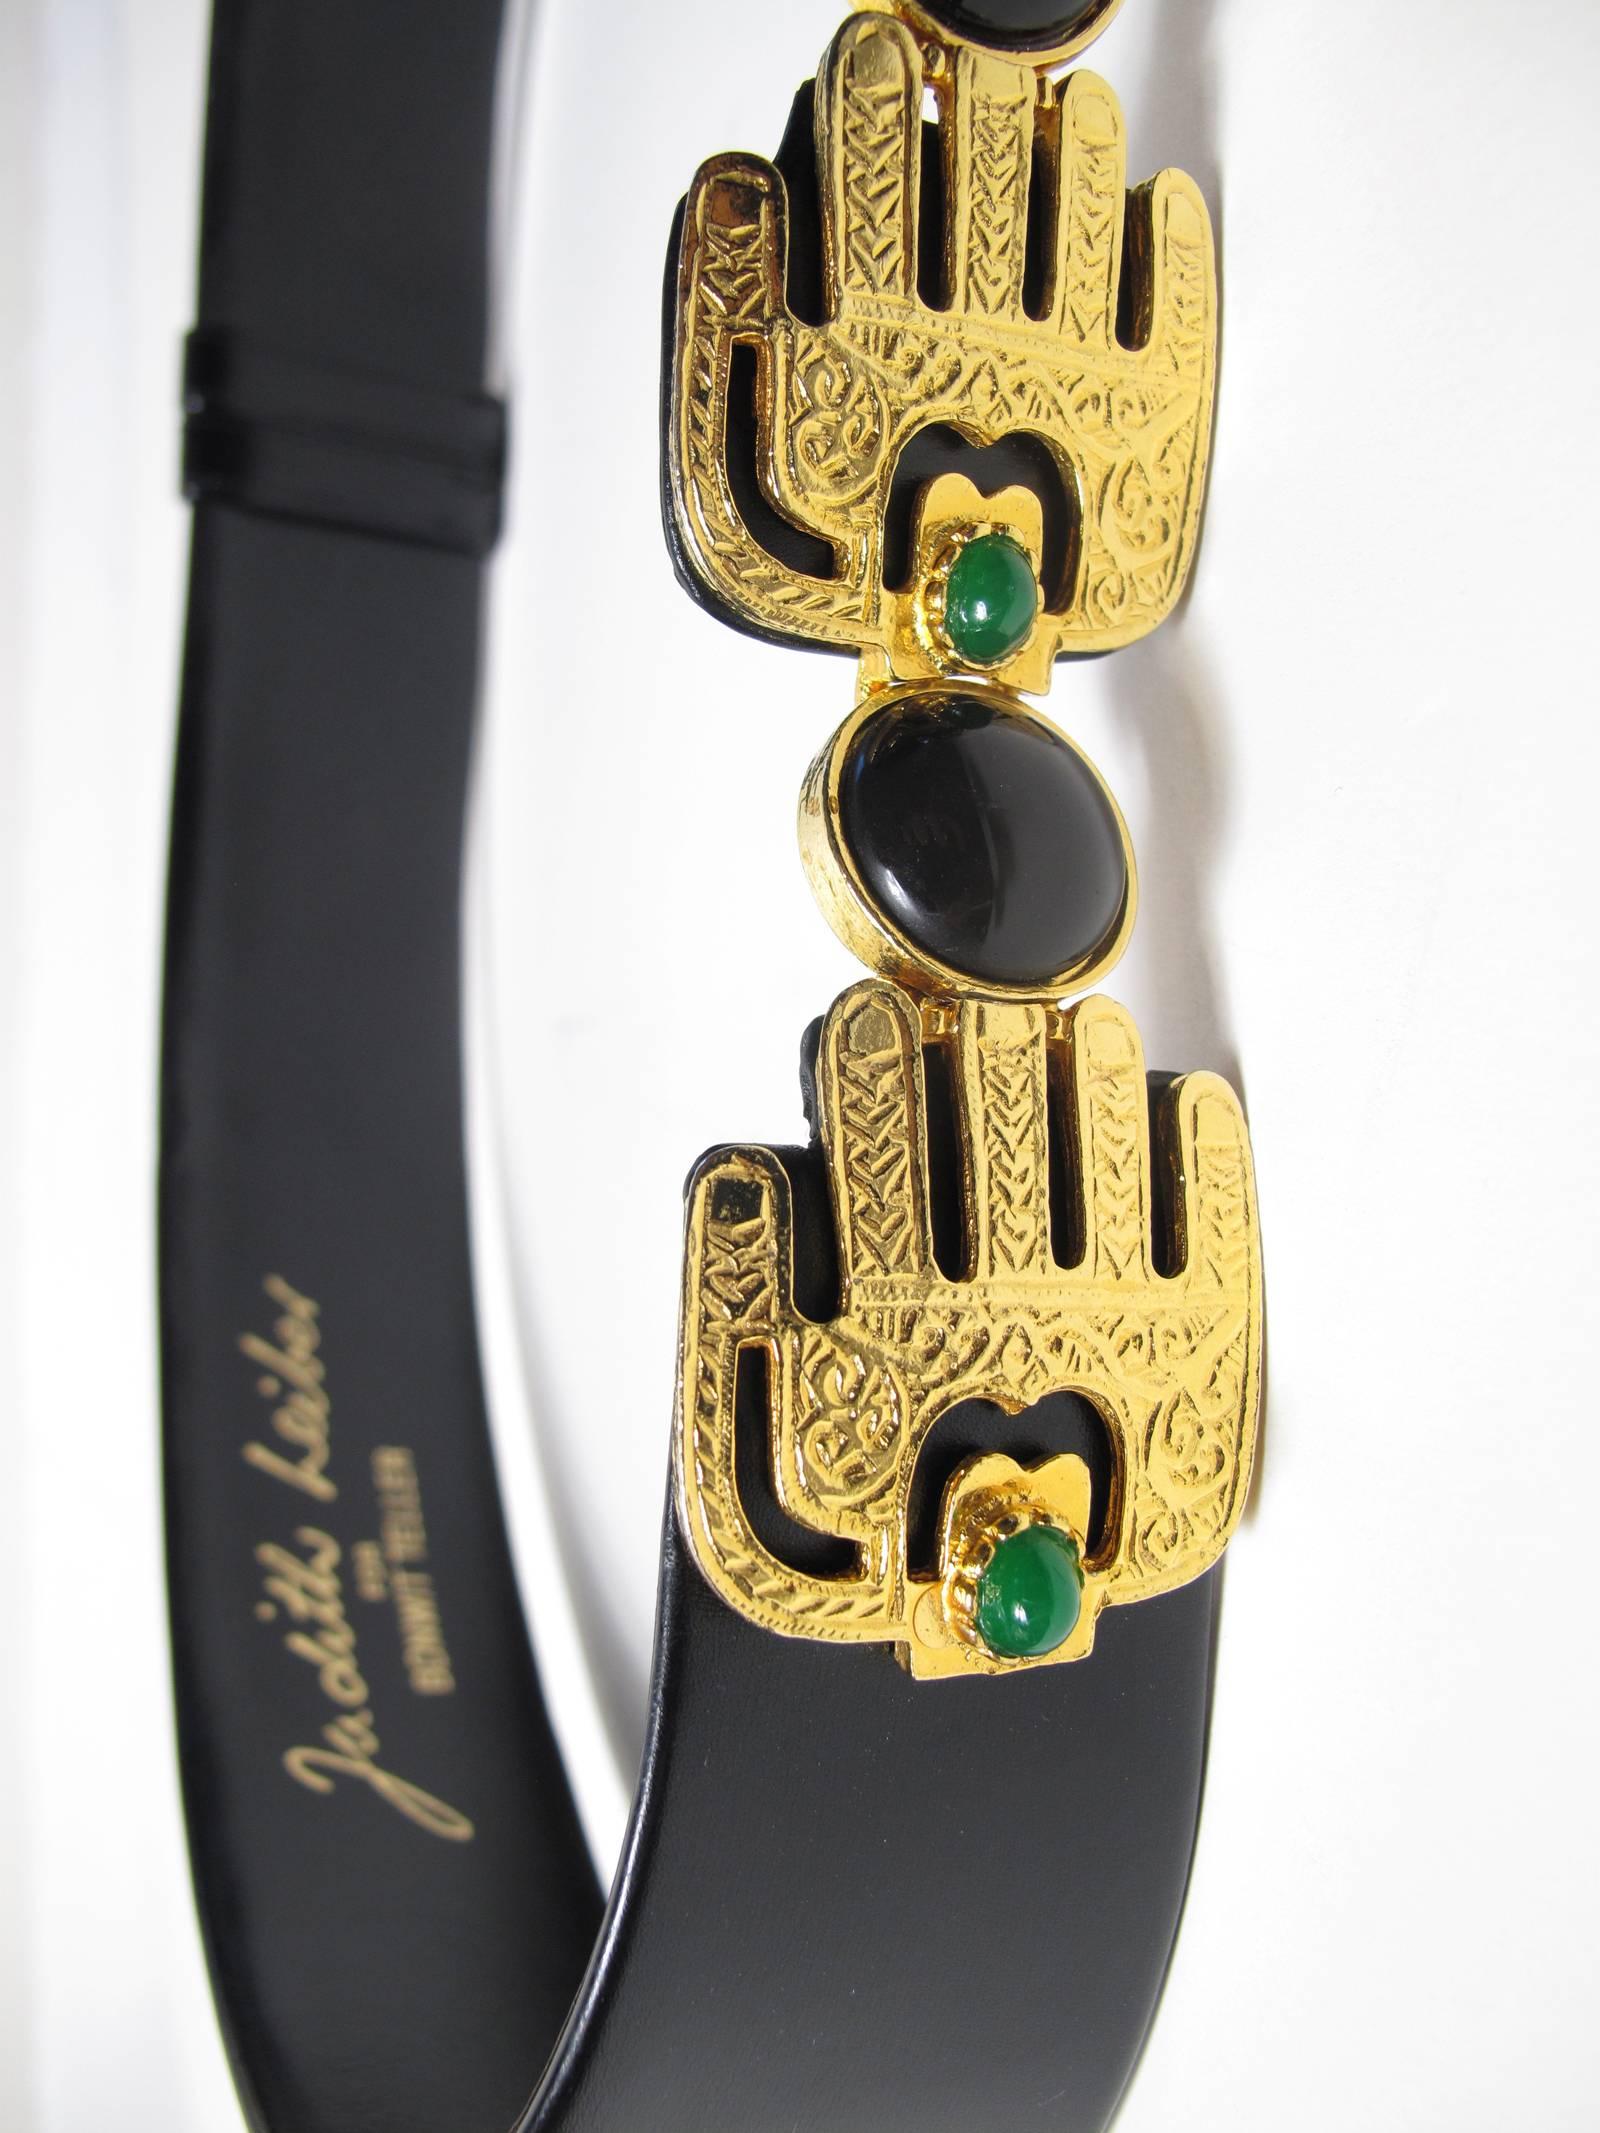 Judith Leiber Hand waist belt.  Condition: Excellent, little wear, never been worn.  One size fits all.  

We accept returns for refund, please see our terms.  We offer free ground shipping within the US.  Please let us know if you have any